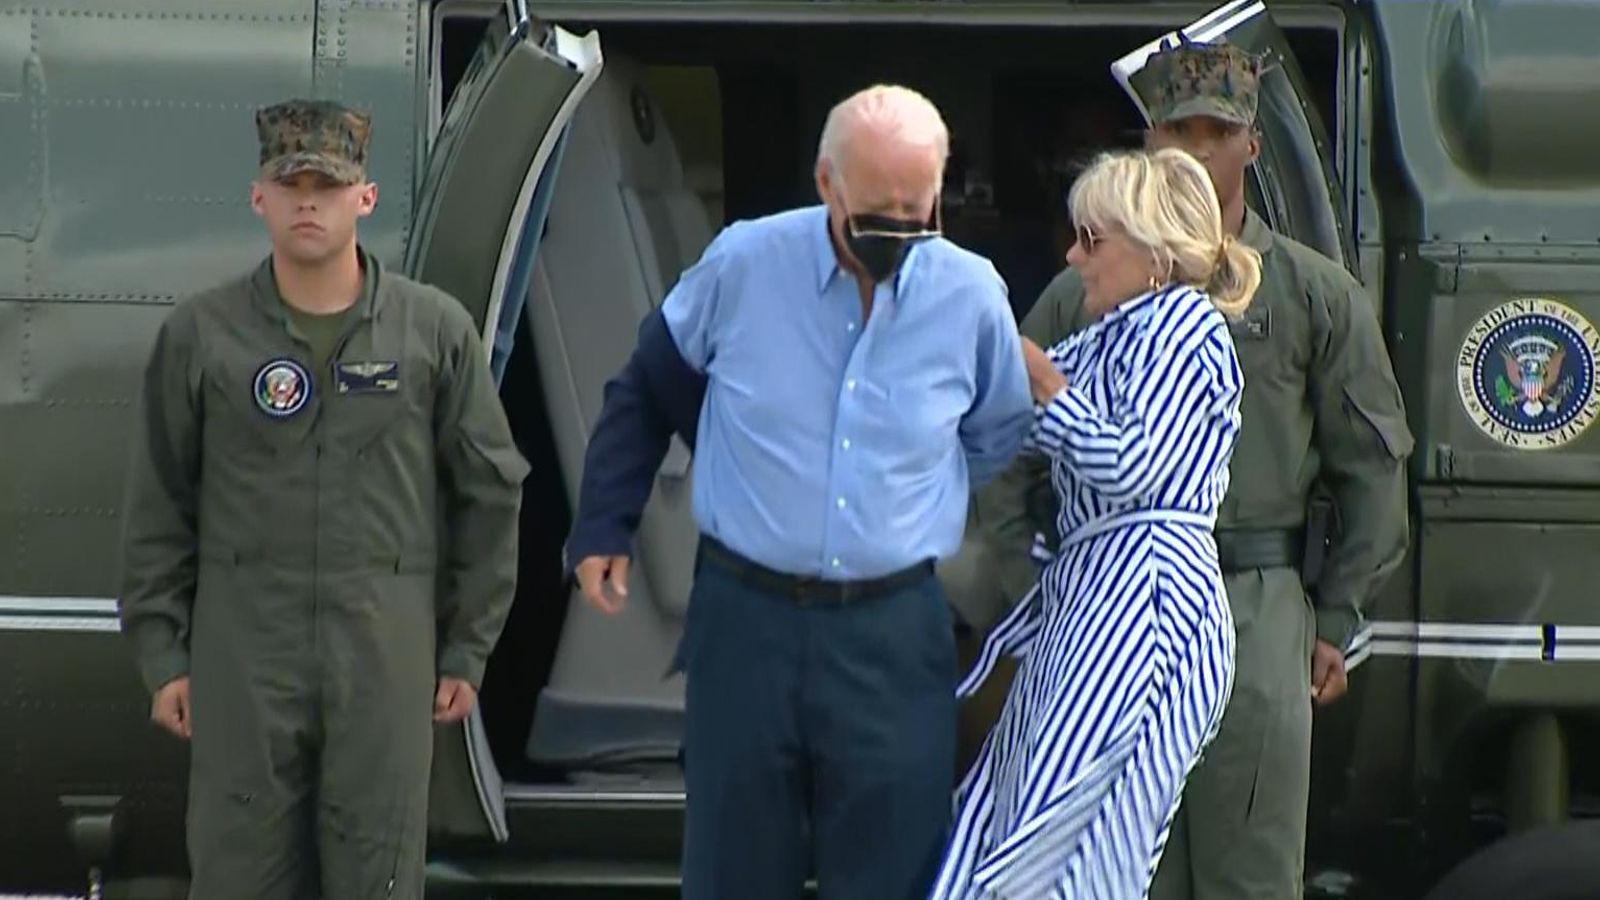 Biden struggles to get his arm into his jacket during Kentucky visit